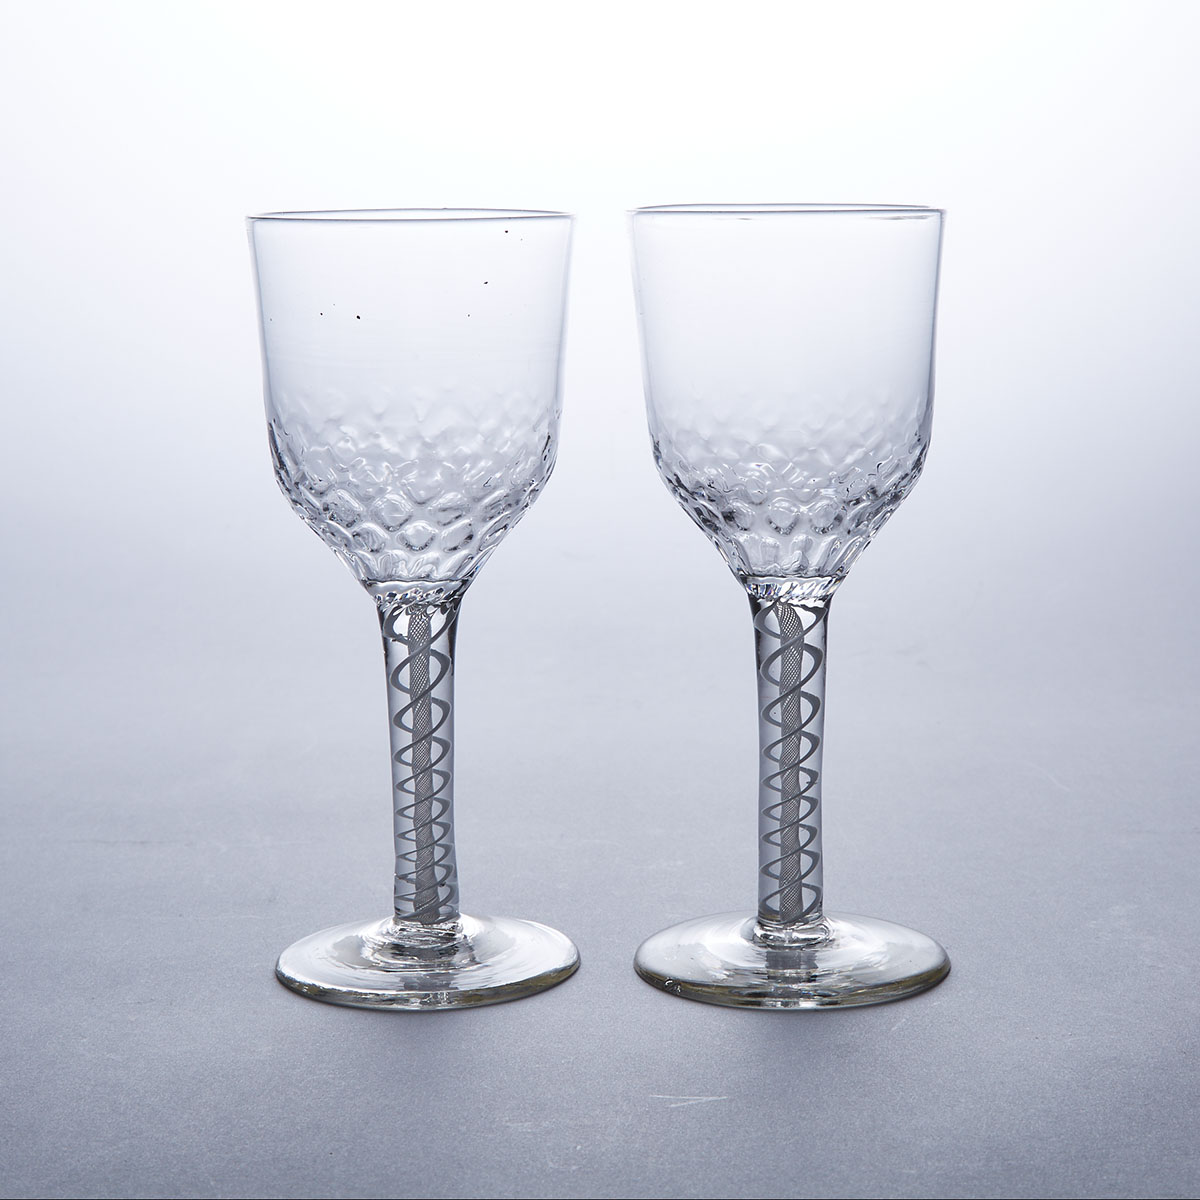 Pair of English Honeycomb Moulded Opaque Twist Stemmed Glass Goblets, c.1760-80